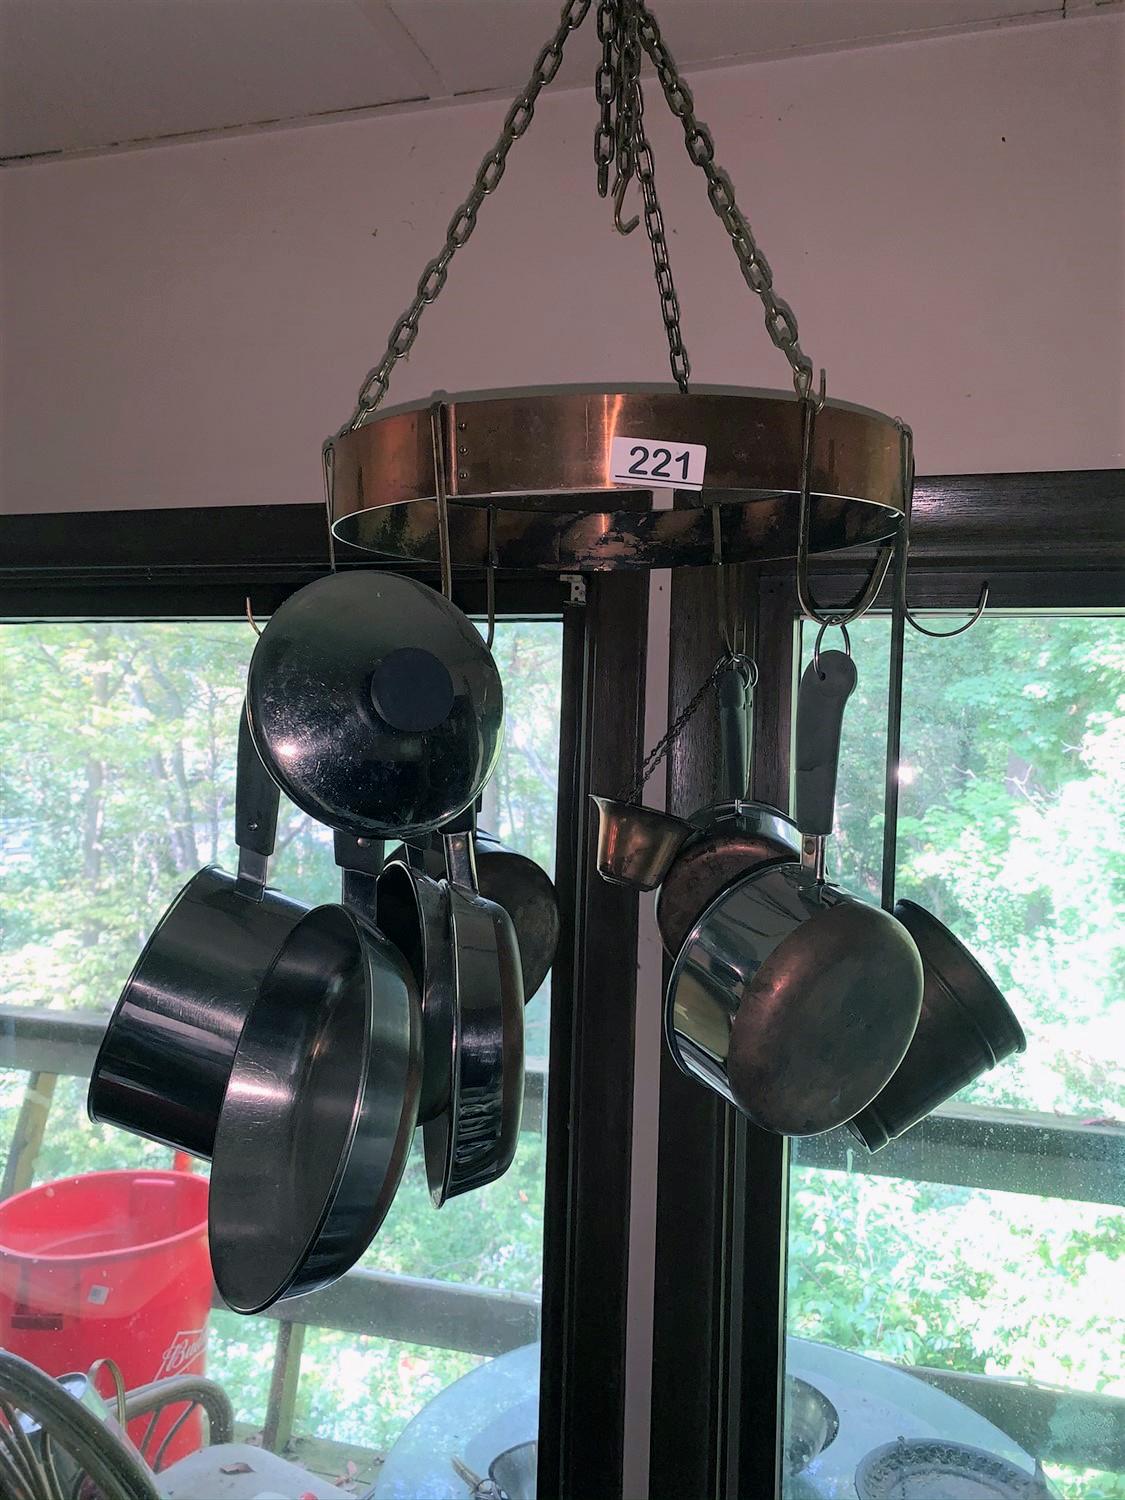 Revere Ware Copper Bottom Pots and Copper Hanging Pot Rack 16" Circumference